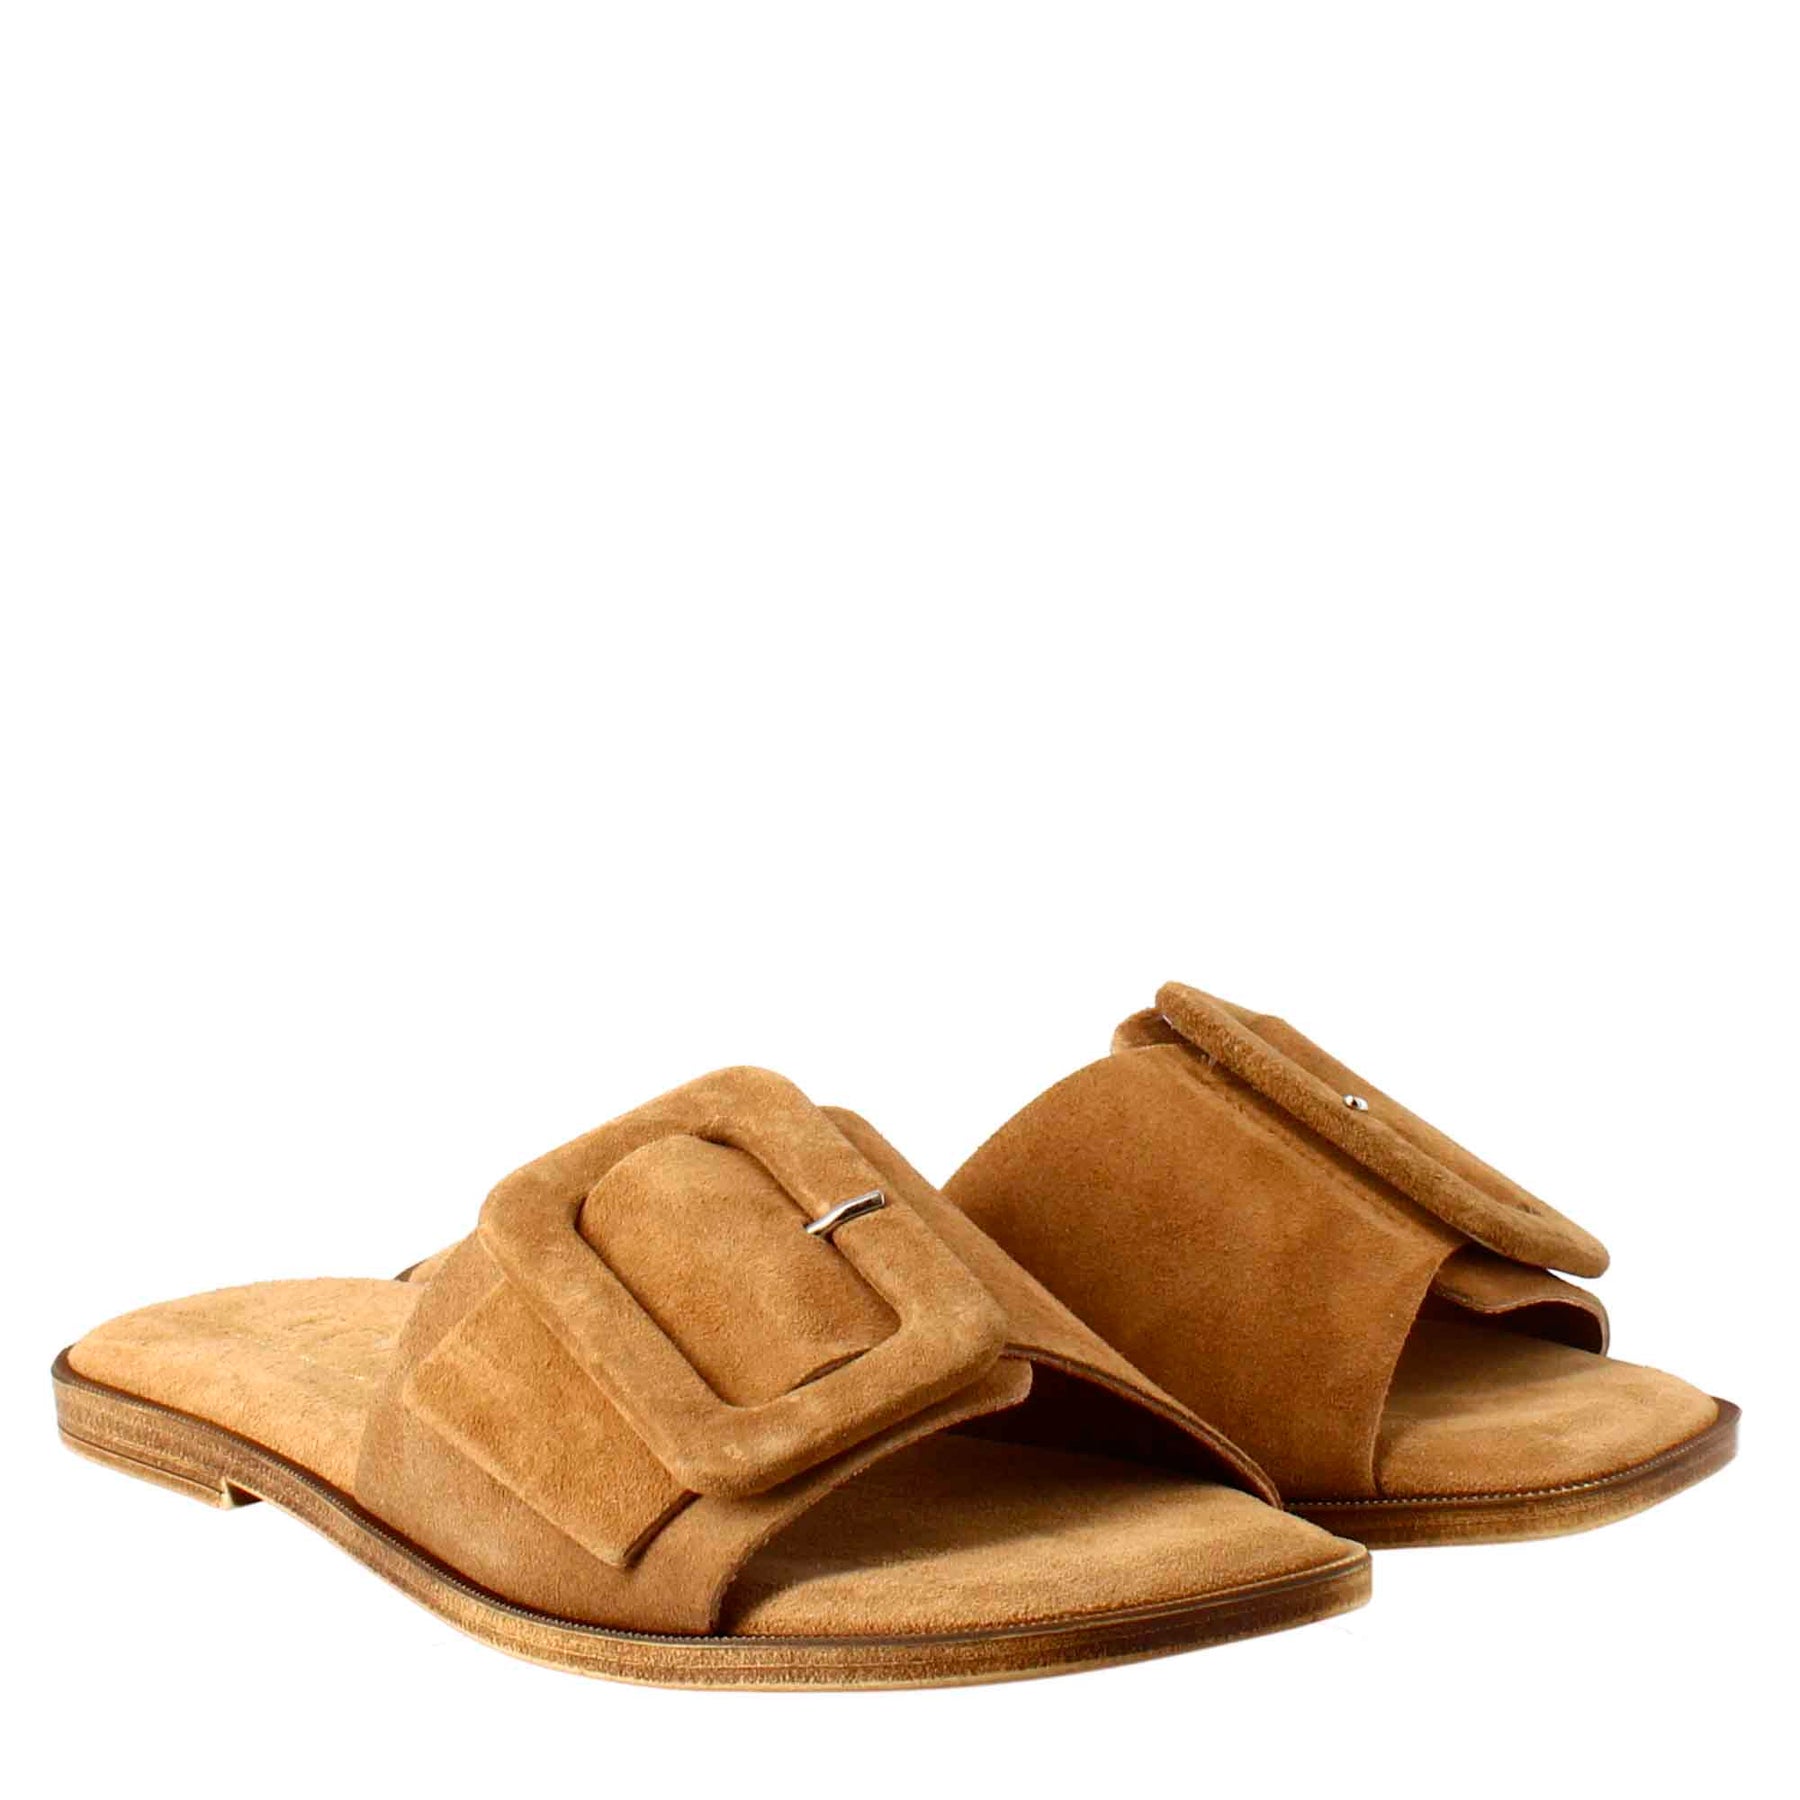 Low sandal for women in brown suede